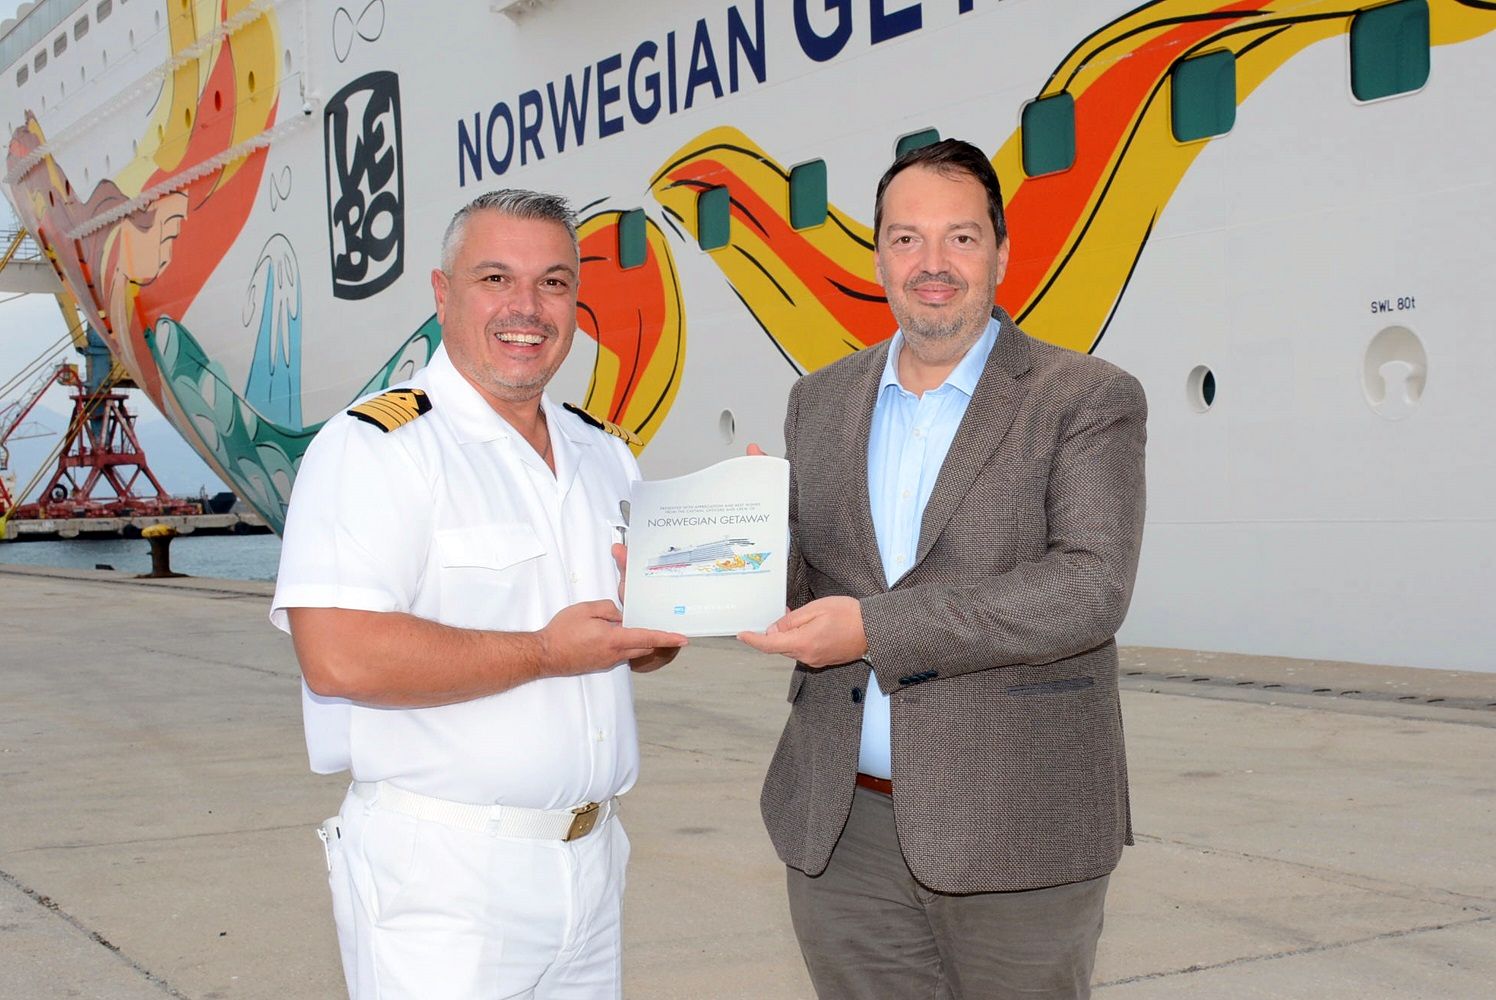 Norwegian Gateway becomes the 110th cruise ship calling the Port of Heraklion this year